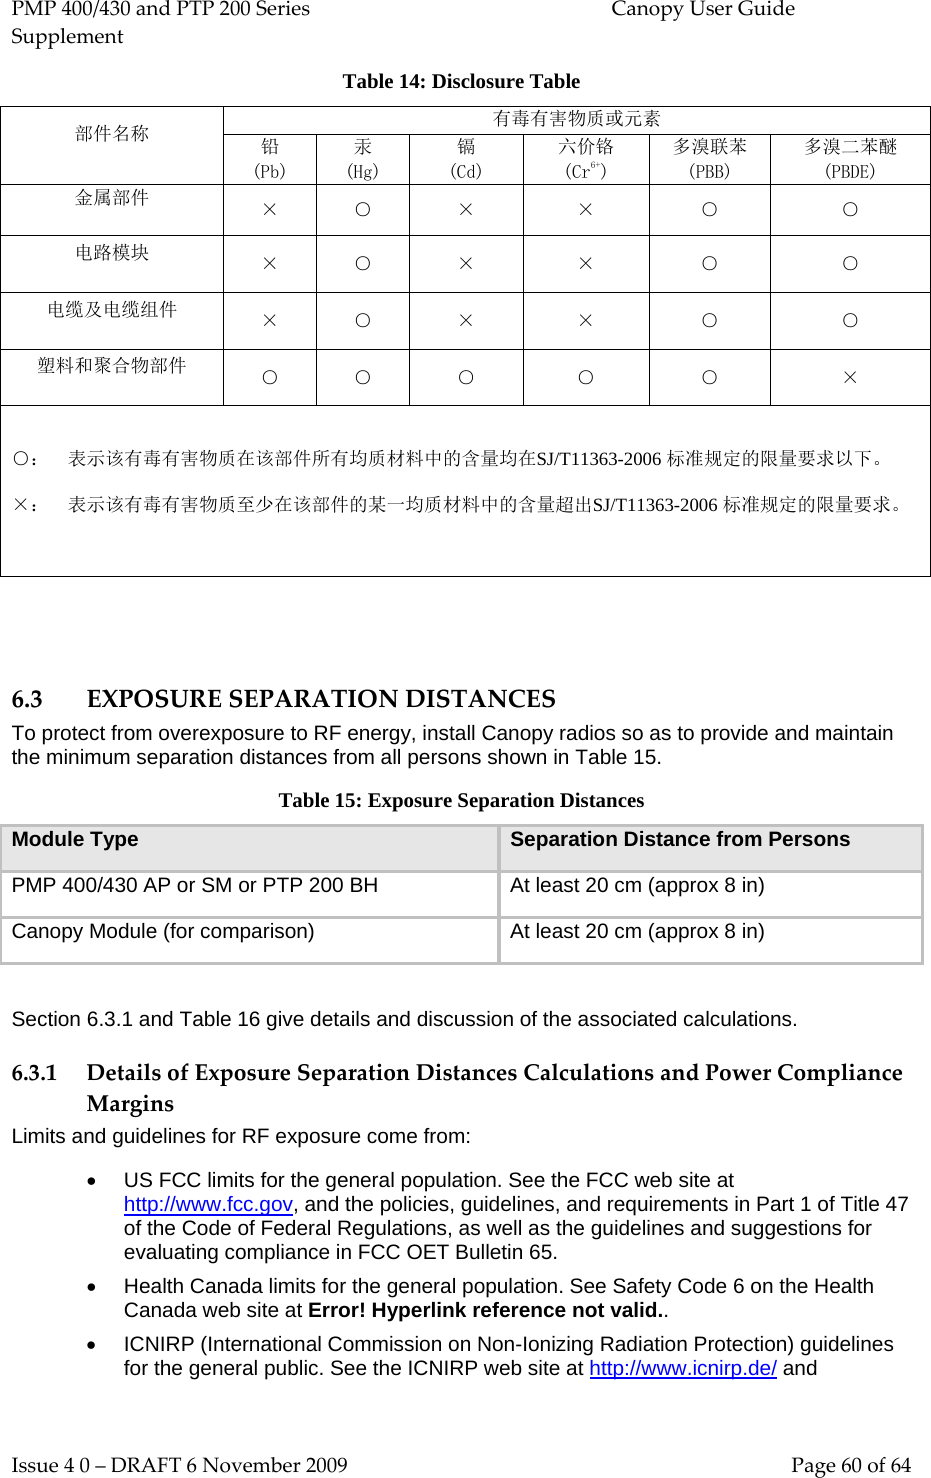 PMP 400/430 and PTP 200 Series  Canopy User Guide Supplement Issue 4 0 – DRAFT 6 November 2009    Page 60 of 64 Table 14: Disclosure Table 部件名称  有毒有害物质或元素  铅 (Pb) 汞 (Hg) 镉 (Cd) 六价铬 (Cr6+) 多溴联苯 (PBB) 多溴二苯醚 (PBDE) 金属部件  × ○ × × ○ ○ 电路模块  × ○ × × ○ ○ 电缆及电缆组件  × ○ × × ○ ○ 塑料和聚合物部件  ○ ○ ○ ○ ○ ×  ○： 表示该有毒有害物质在该部件所有均质材料中的含量均在SJ/T11363-2006 标准规定的限量要求以下。       ×： 表示该有毒有害物质至少在该部件的某一均质材料中的含量超出SJ/T11363-2006 标准规定的限量要求。      6.3 EXPOSURE SEPARATION DISTANCES To protect from overexposure to RF energy, install Canopy radios so as to provide and maintain the minimum separation distances from all persons shown in Table 15.  Table 15: Exposure Separation Distances Module Type Separation Distance from Persons PMP 400/430 AP or SM or PTP 200 BH At least 20 cm (approx 8 in) Canopy Module (for comparison) At least 20 cm (approx 8 in)  Section 6.3.1 and Table 16 give details and discussion of the associated calculations. 6.3.1 Details of Exposure Separation Distances Calculations and Power Compliance Margins Limits and guidelines for RF exposure come from: • US FCC limits for the general population. See the FCC web site at http://www.fcc.gov, and the policies, guidelines, and requirements in Part 1 of Title 47 of the Code of Federal Regulations, as well as the guidelines and suggestions for evaluating compliance in FCC OET Bulletin 65.  • Health Canada limits for the general population. See Safety Code 6 on the Health Canada web site at Error! Hyperlink reference not valid.. • ICNIRP (International Commission on Non-Ionizing Radiation Protection) guidelines for the general public. See the ICNIRP web site at http://www.icnirp.de/ and 